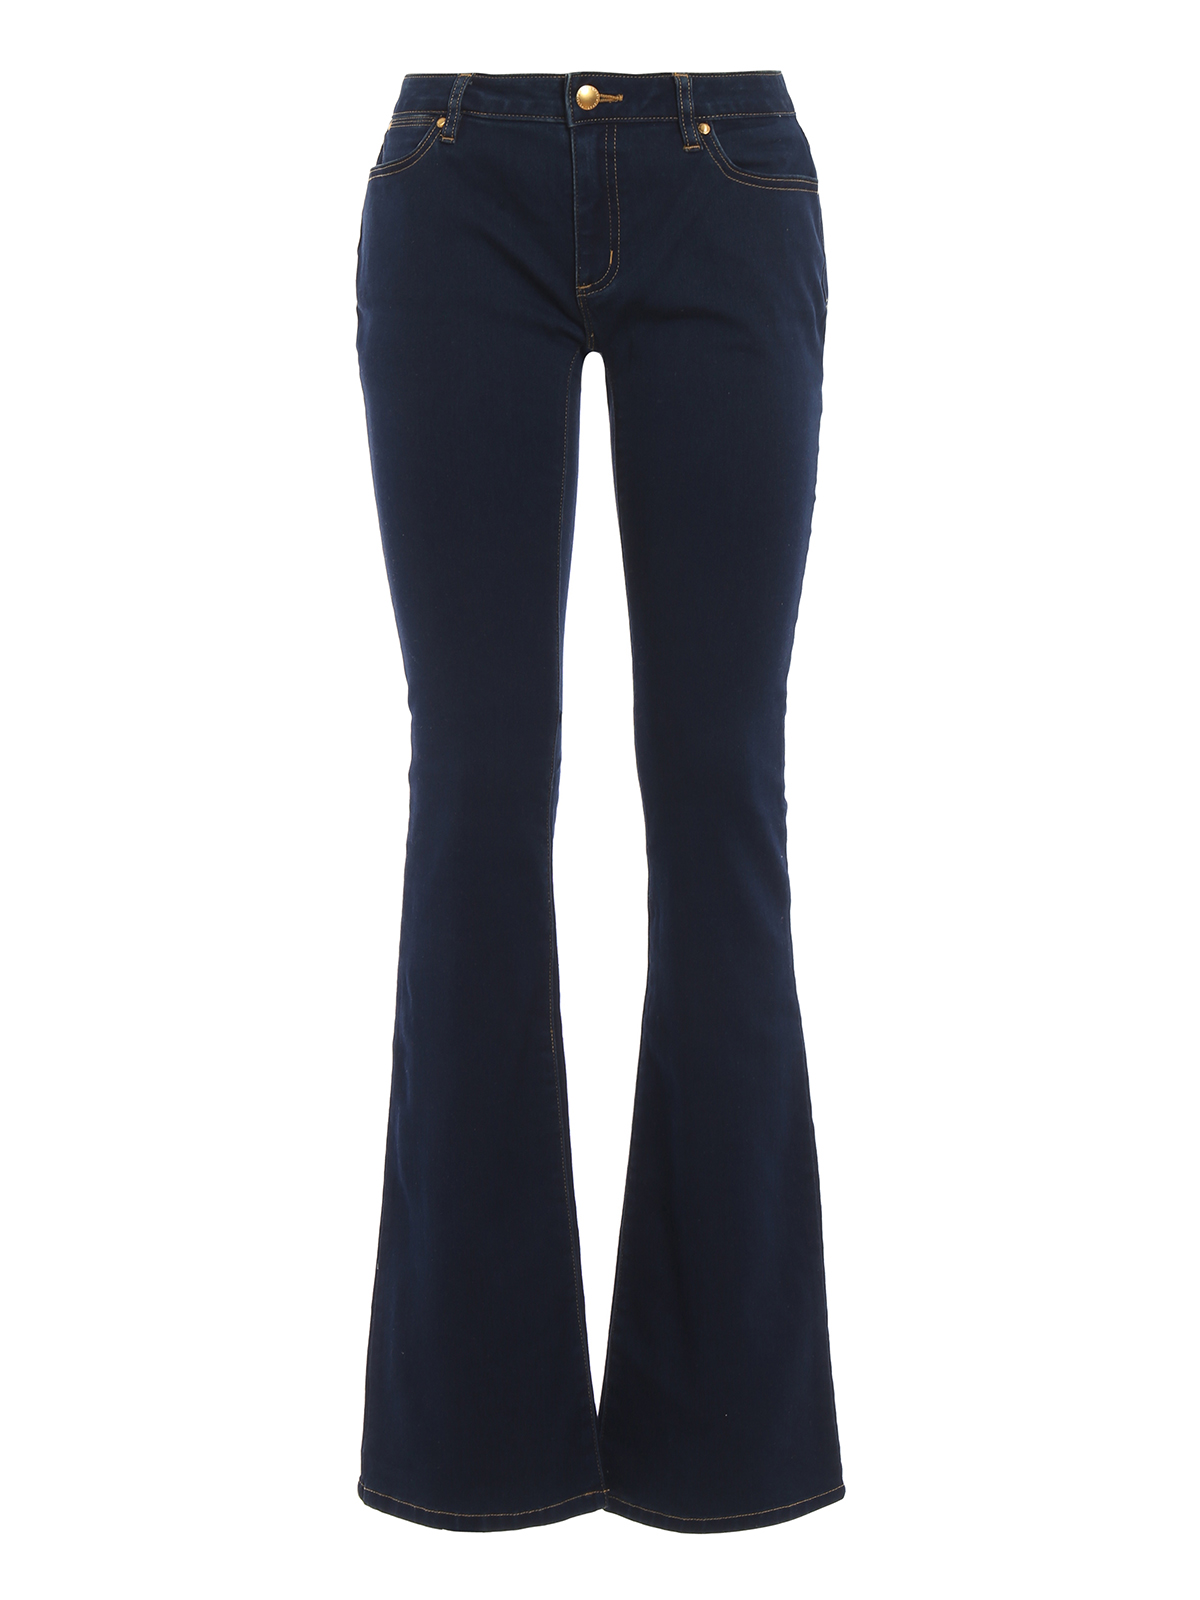 Michael Kors - Izzy mid rise twilight wash jeans - bootcut jeans ...